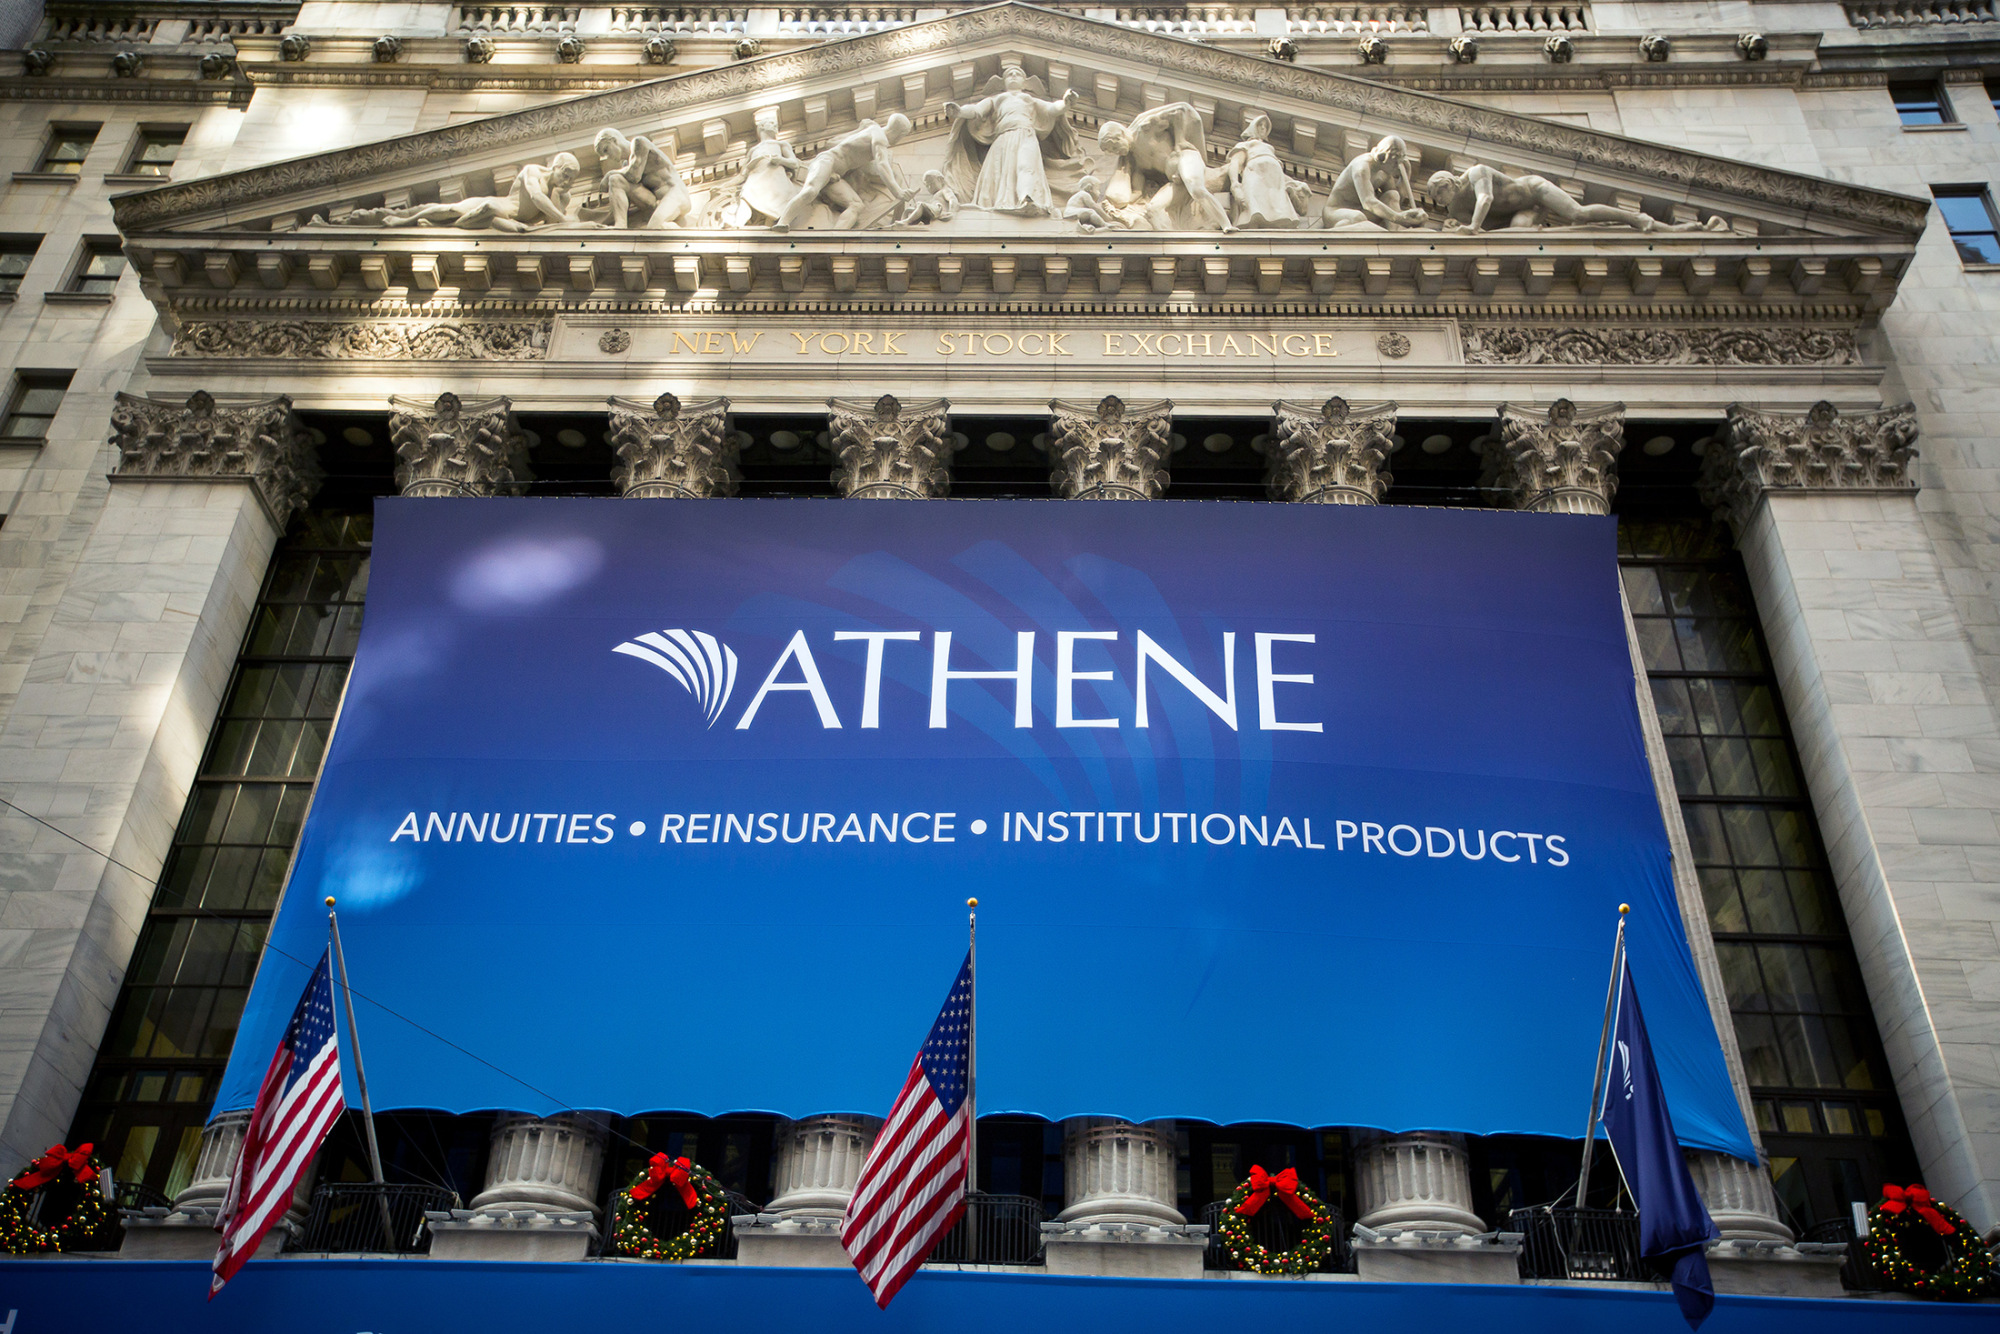 Athene Holding Ltd. signage is displayed outside of the New York Stock Exchange (NYSE) during the initial public offering of the company's stock in New York, U.S., on Friday, Dec. 9, 2016. U.S. stocks were set for a record as oil powered above $51 a barrel on signs producers are following through with agreed production cuts. The dollar rose toward an 18-month high.
